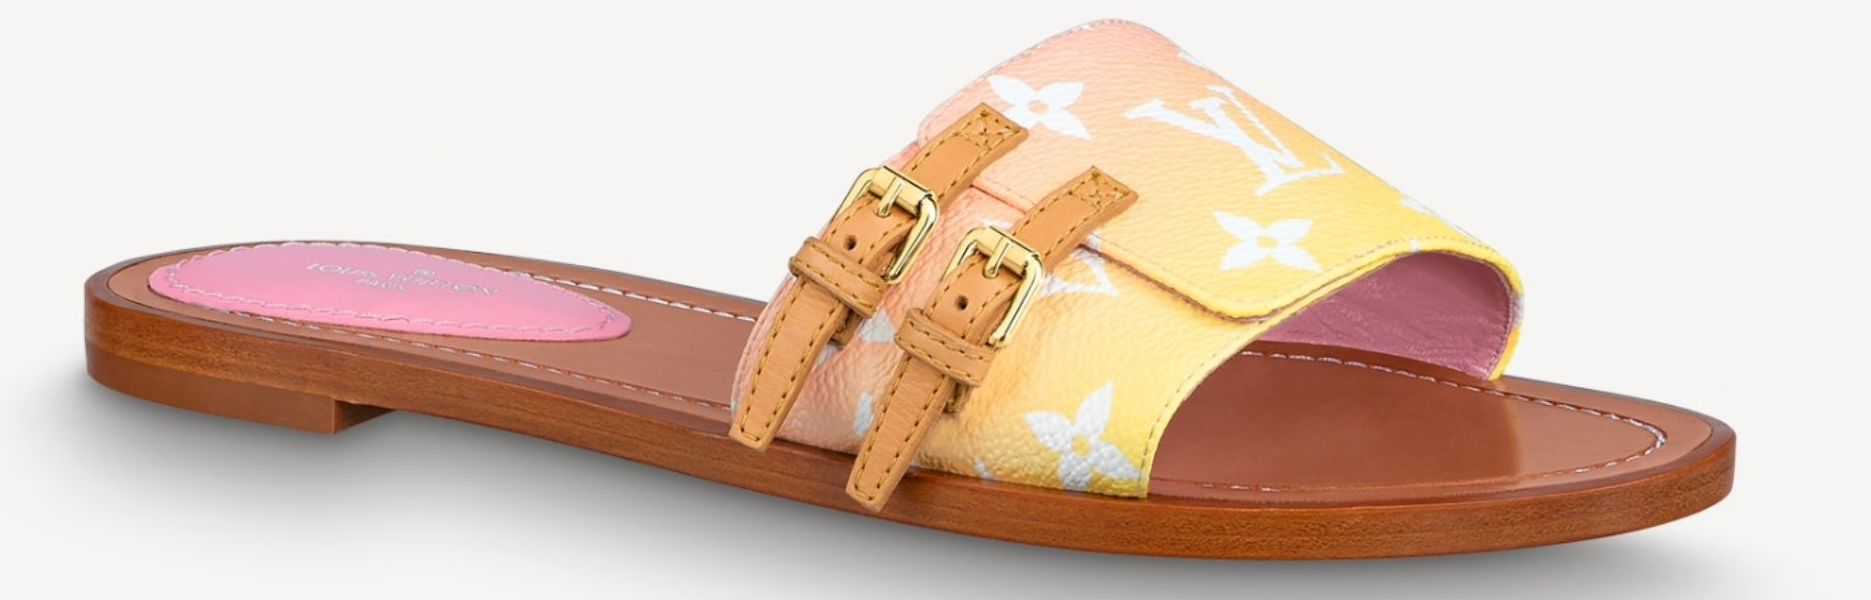 Louis Vuitton LV by The Pool Revival Flat Mule